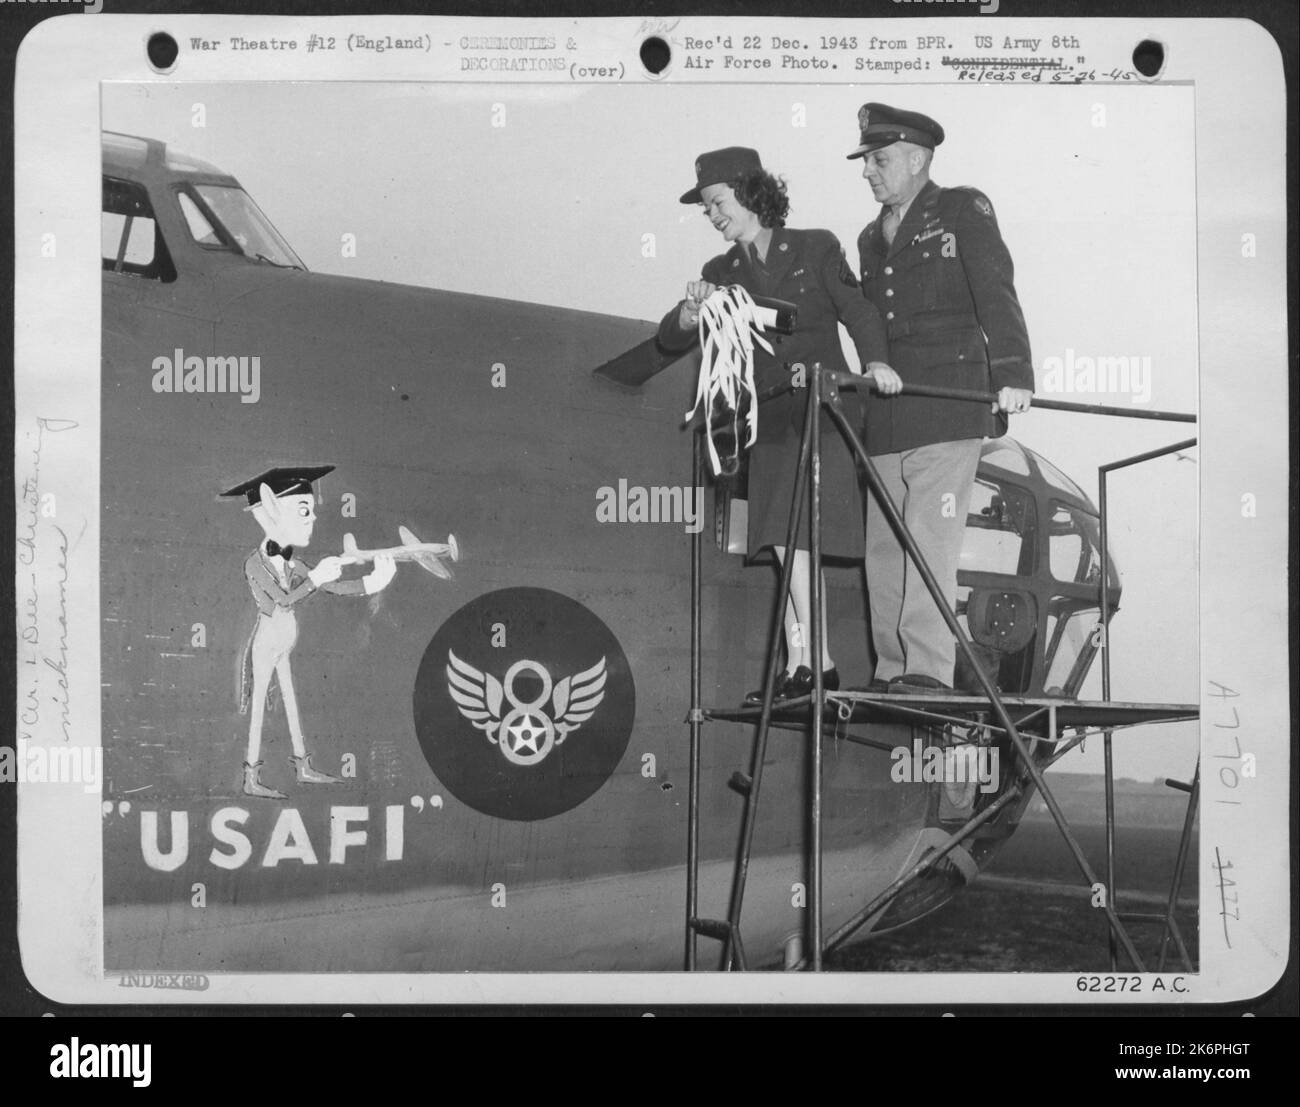 Colonel Leslie P. Arnold, Commanding Officer Of The Ferry And Transport Service Assists T/5 Muriel Blum In Christening Converted B-24 Lib 'Usafi' Gremlin 'Usafi' Represents The U.S. Armed Forces Institute Which Is Bringing Education To The Enlisted Man In Stock Photo